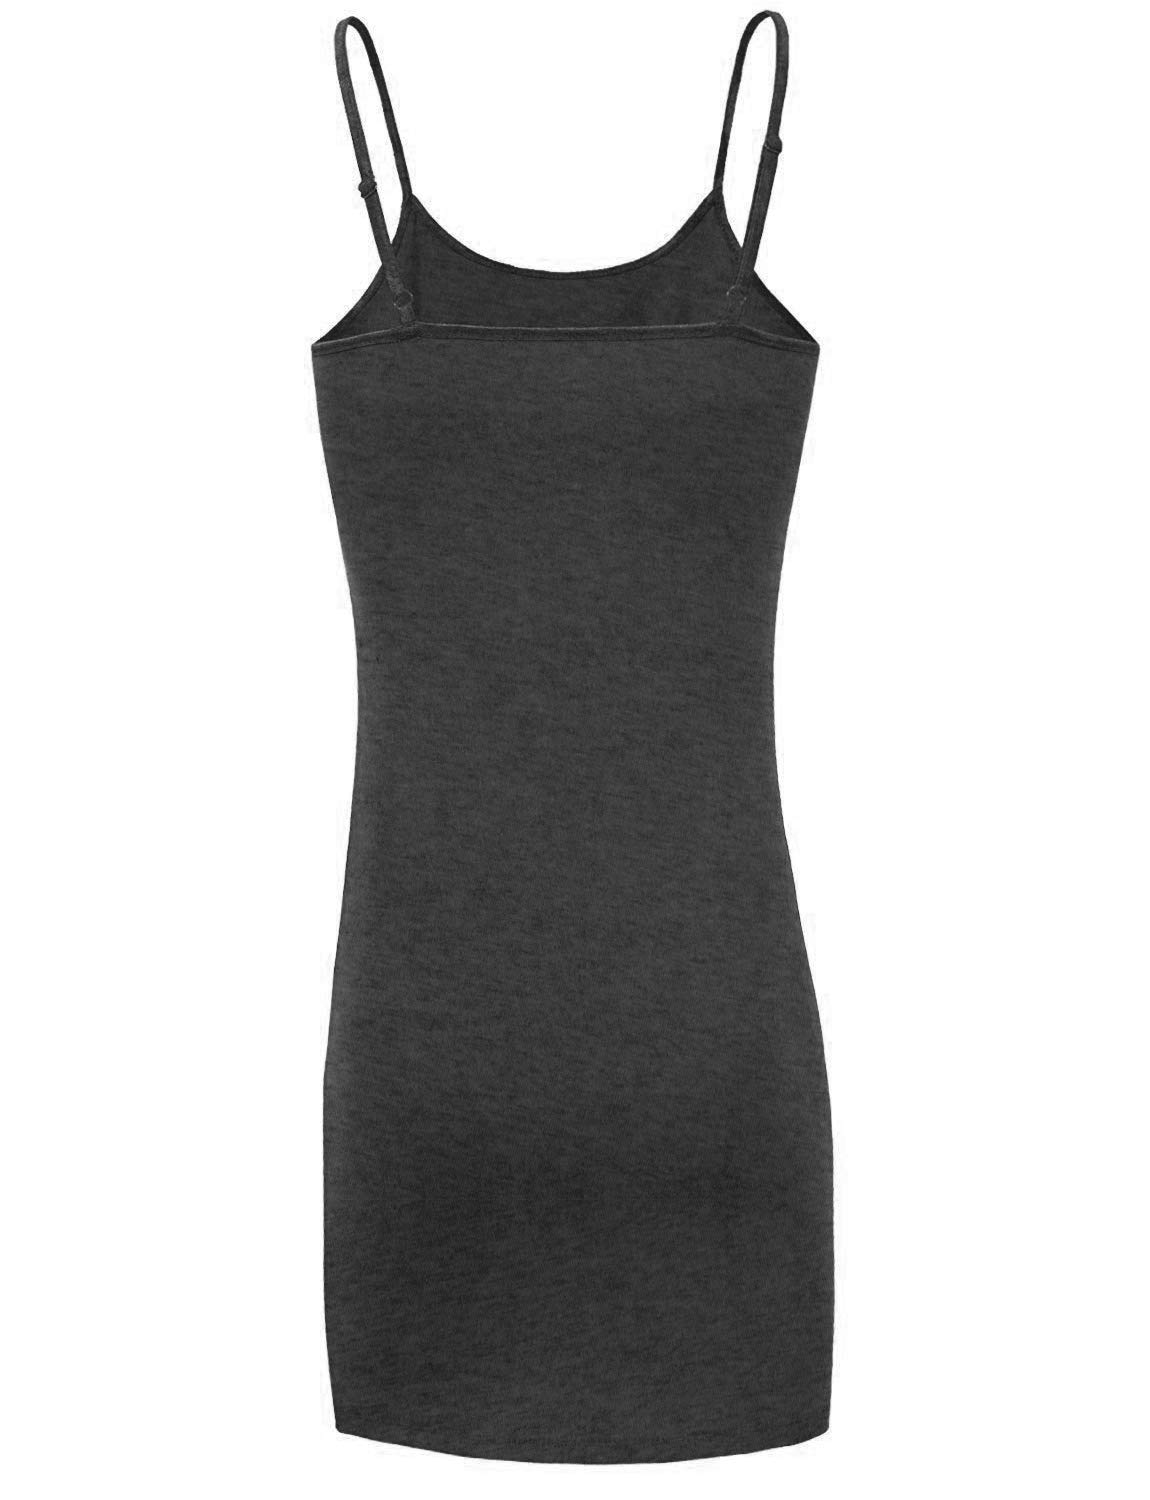 J. LOVNY Womens Basic Solid Spaghetti Strap Fitted Tunic Sleeveless Top Dress